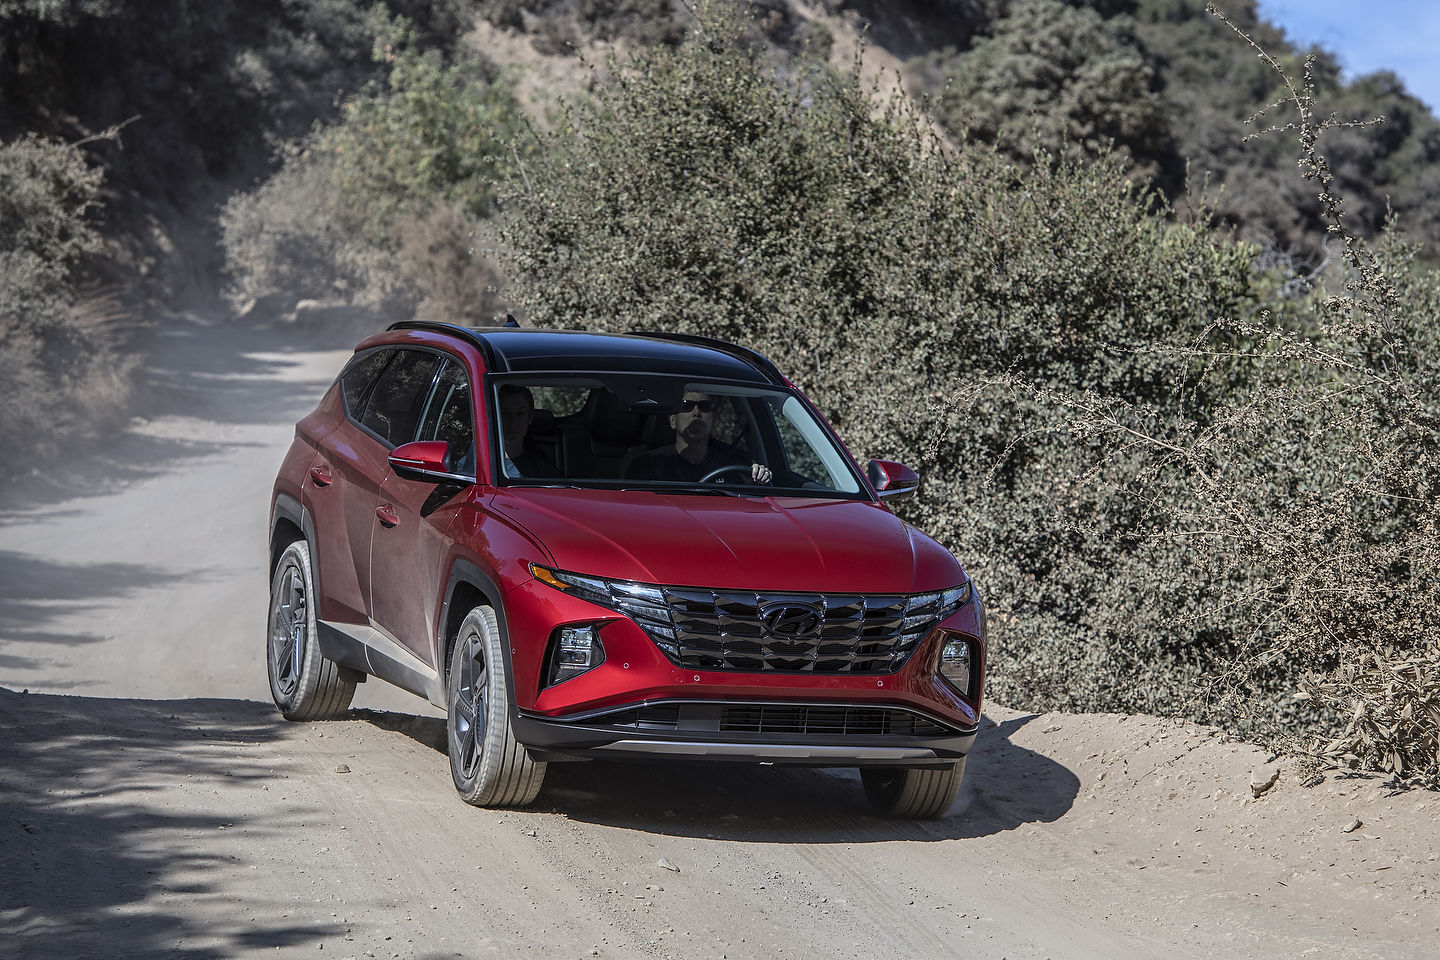 The technologies that improve efficiency on the 2022 Hyundai Tucson